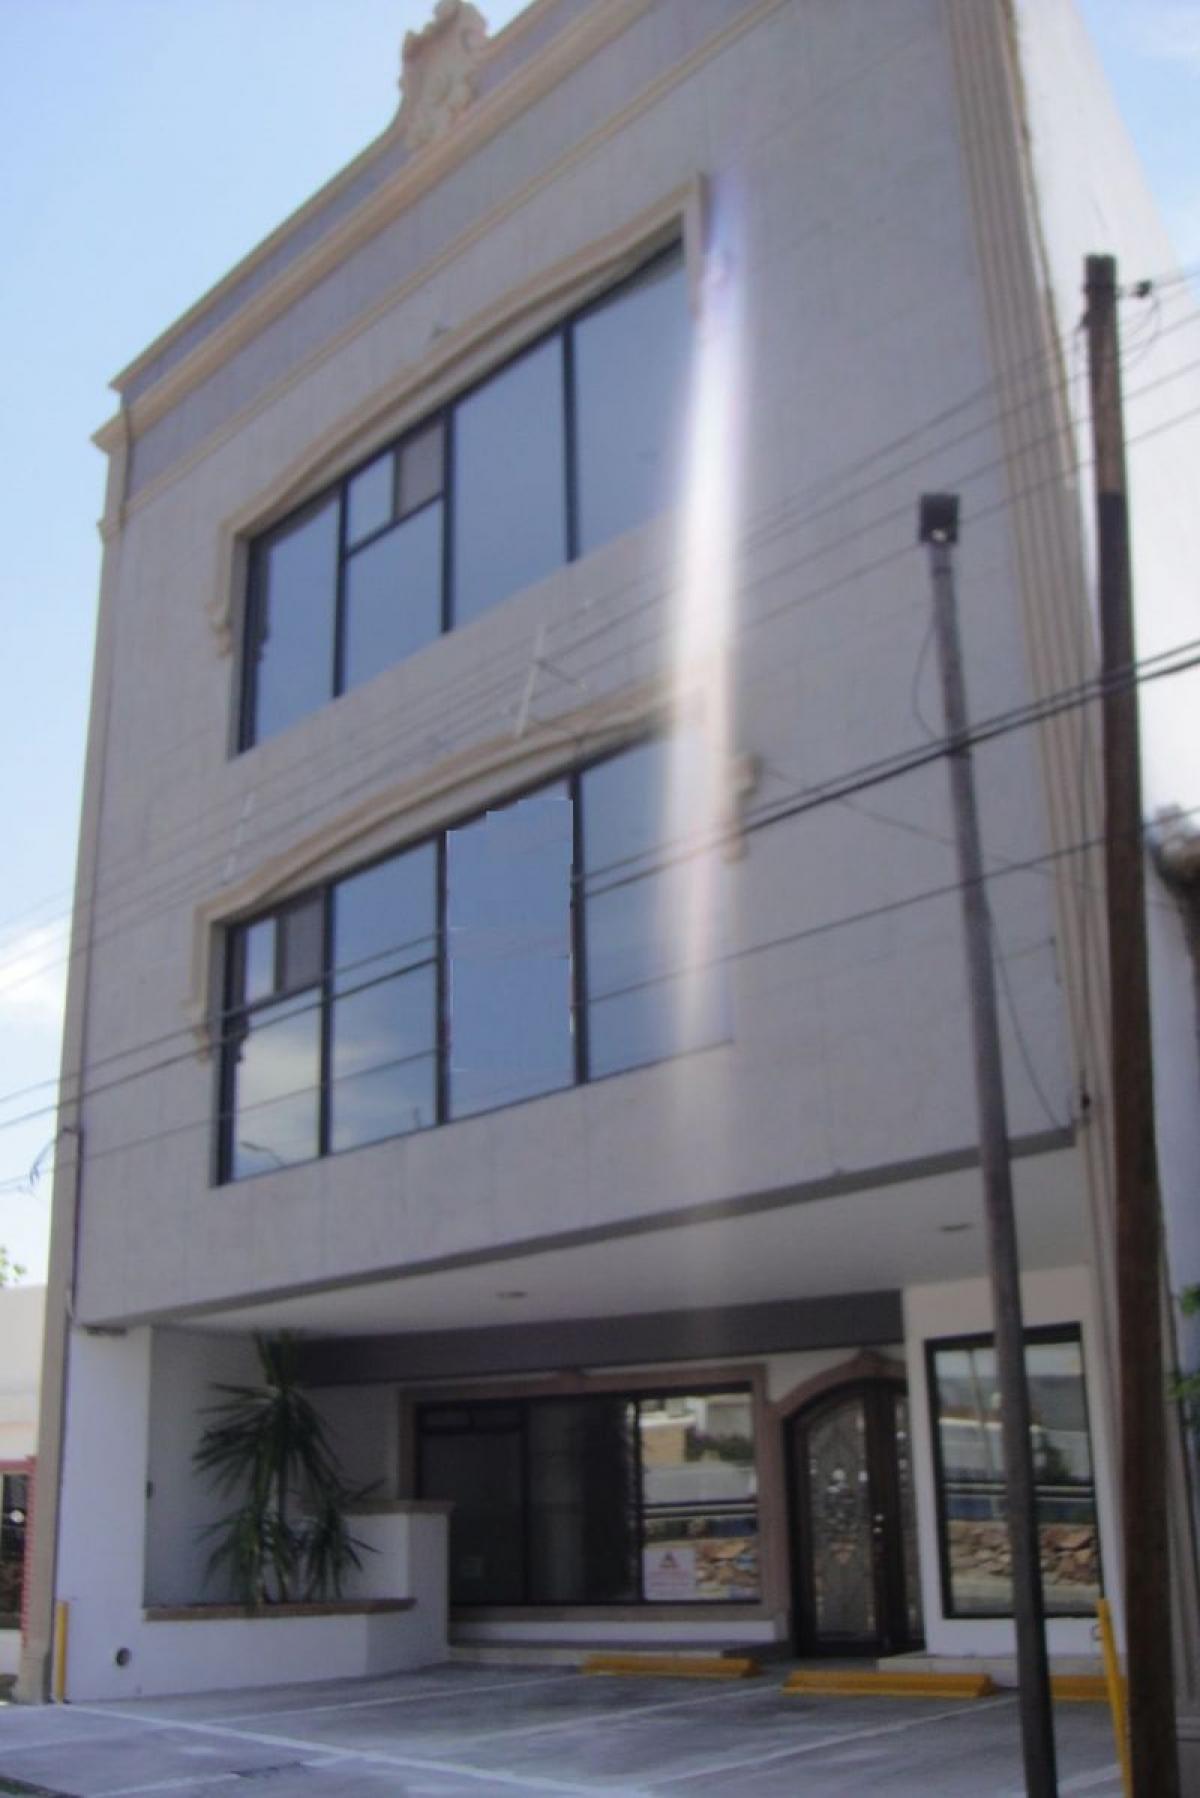 Picture of Apartment Building For Sale in Chihuahua, Chihuahua, Mexico